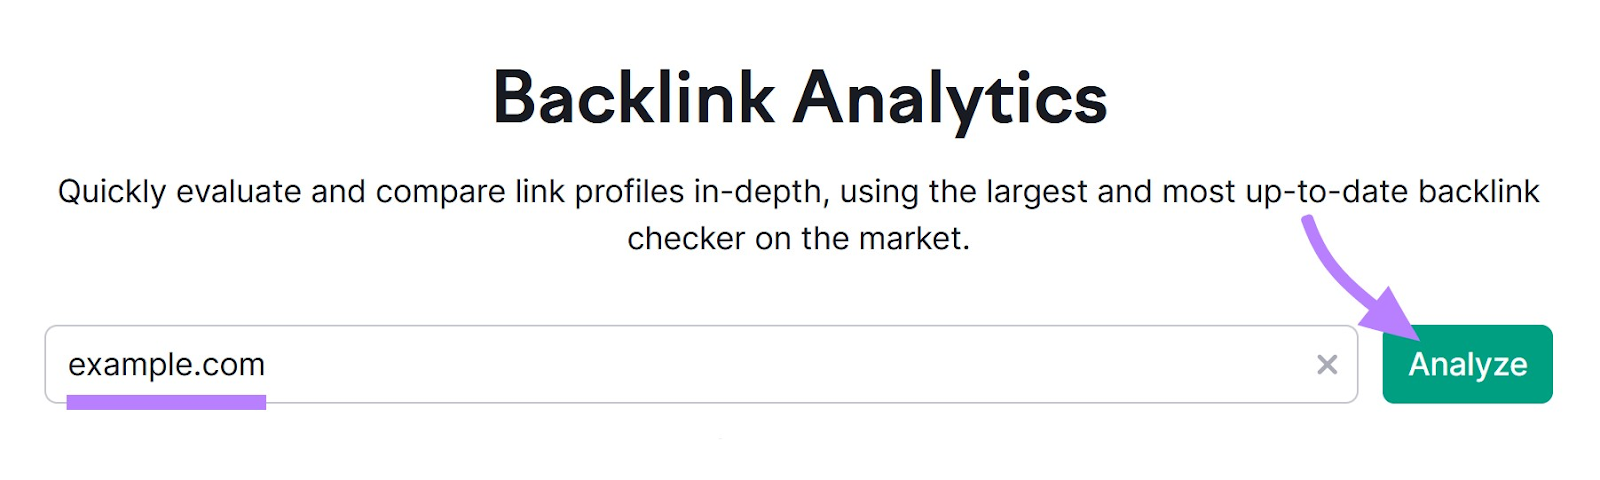 Backlink Analytics tool with "example.com" in a search bar and "analyze" button highlighted